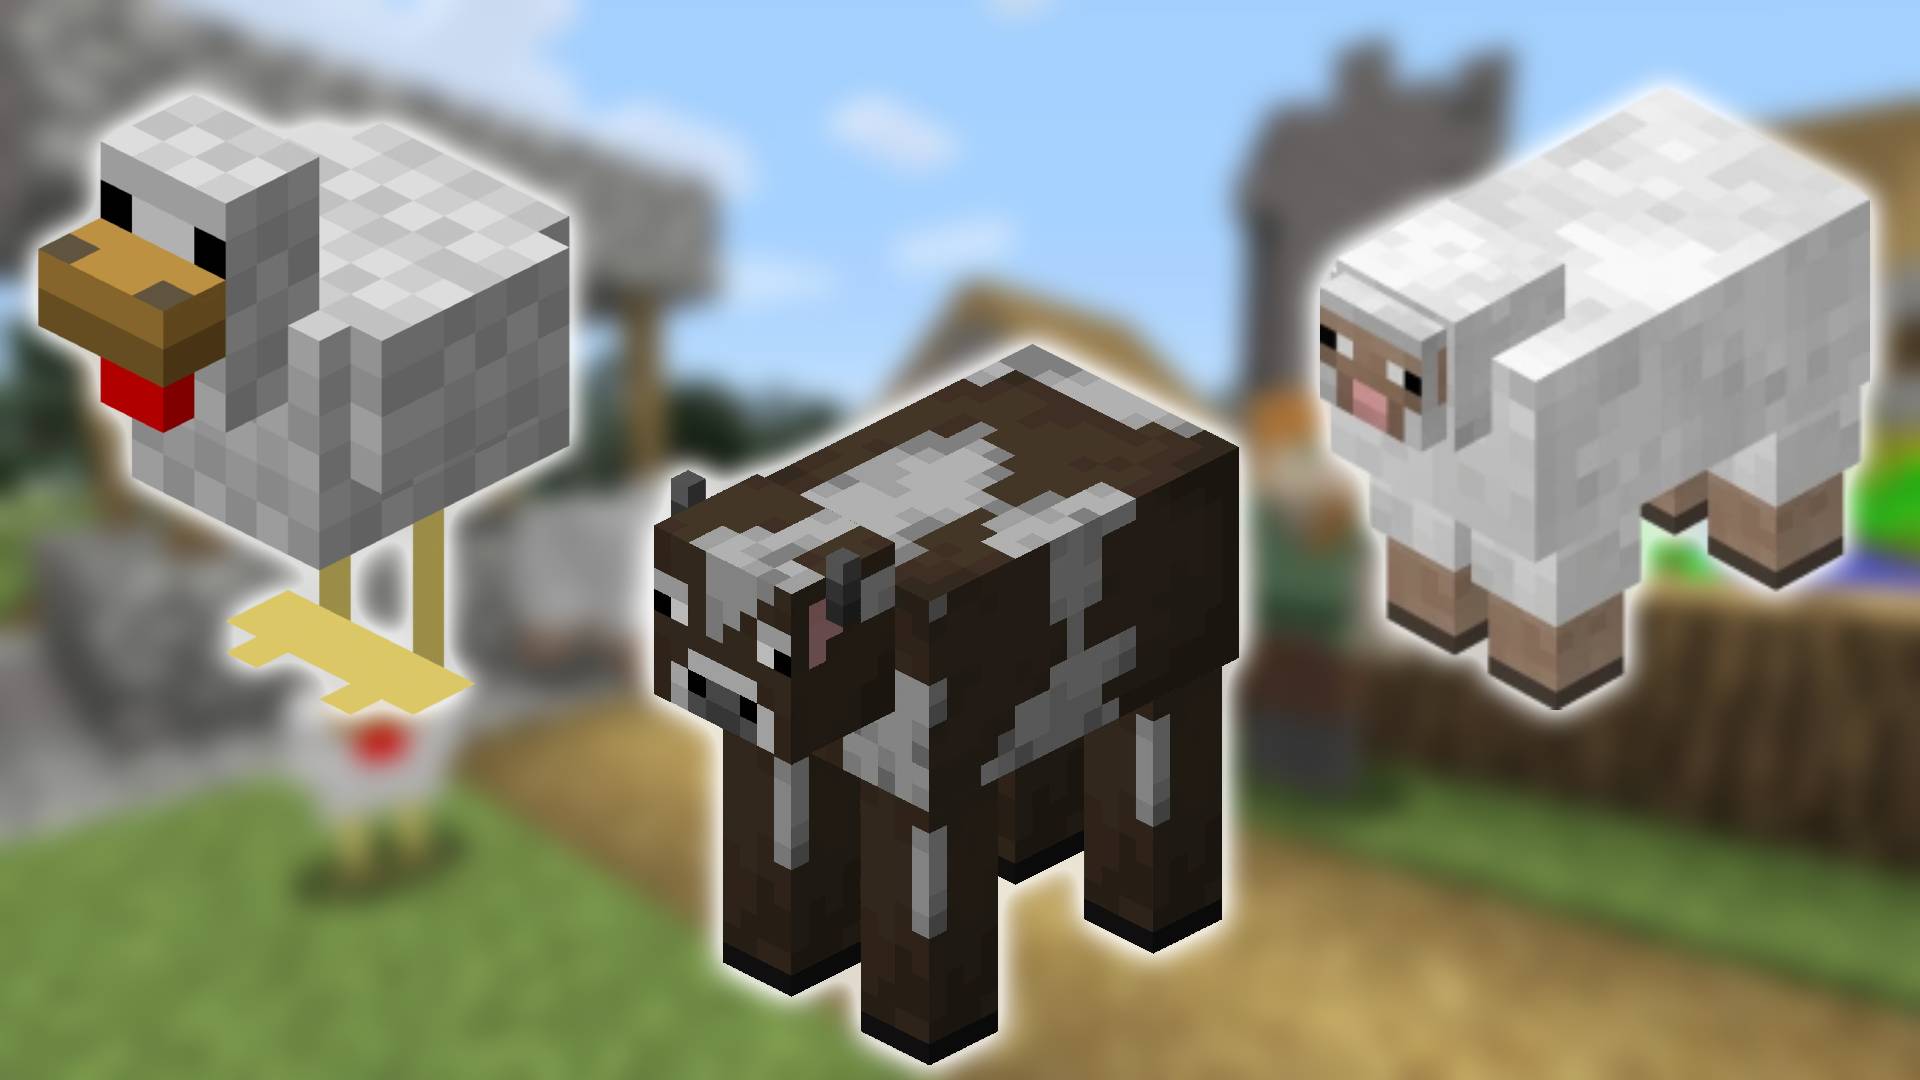 Minecraft mobs: a screenshot of Minecraft is in the background, while the foreground shows images of Minecraft versions of a chicken, a cow, and a sheep